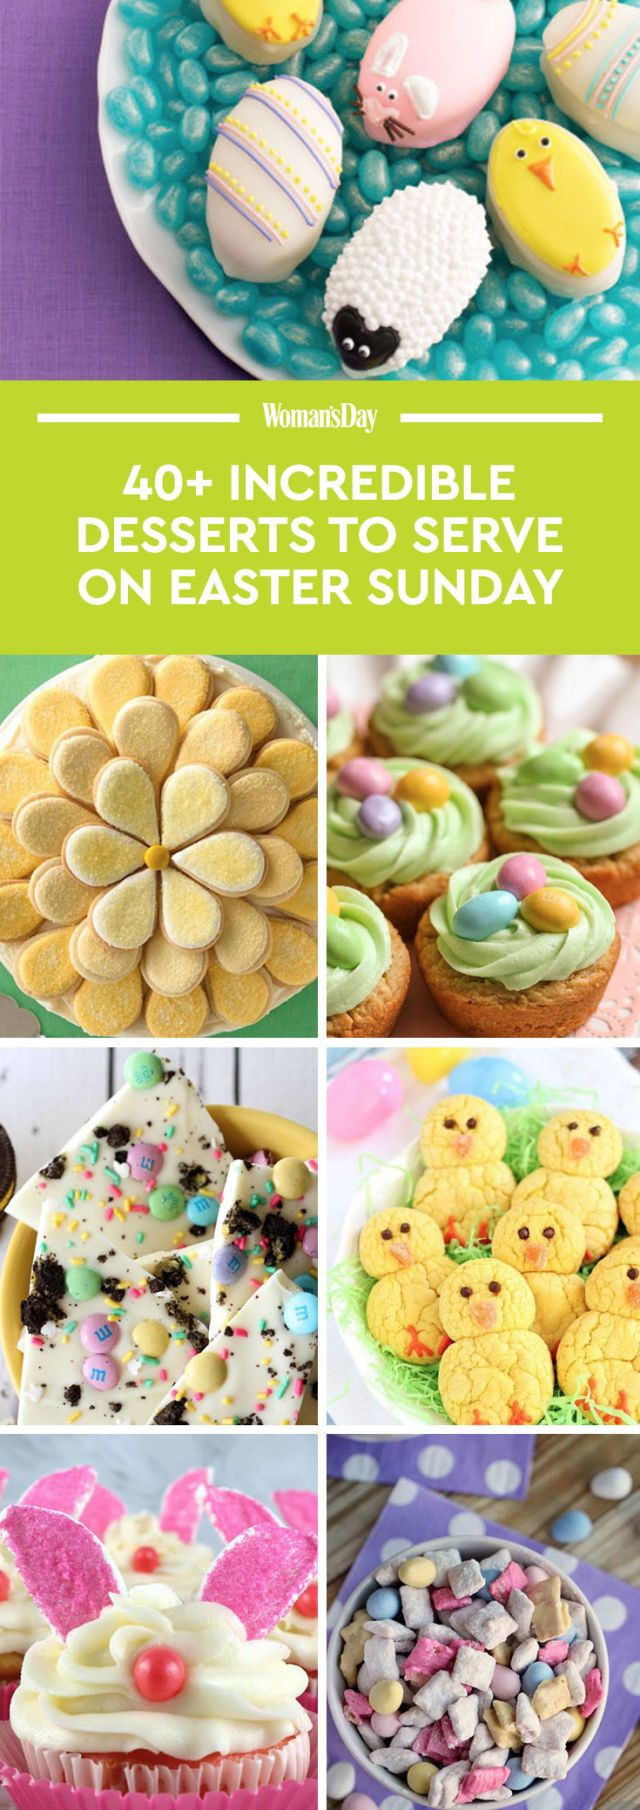 Easy Easter Desserts Recipes With Pictures
 51 Best Easter Desserts Easy Ideas for Easter Dessert